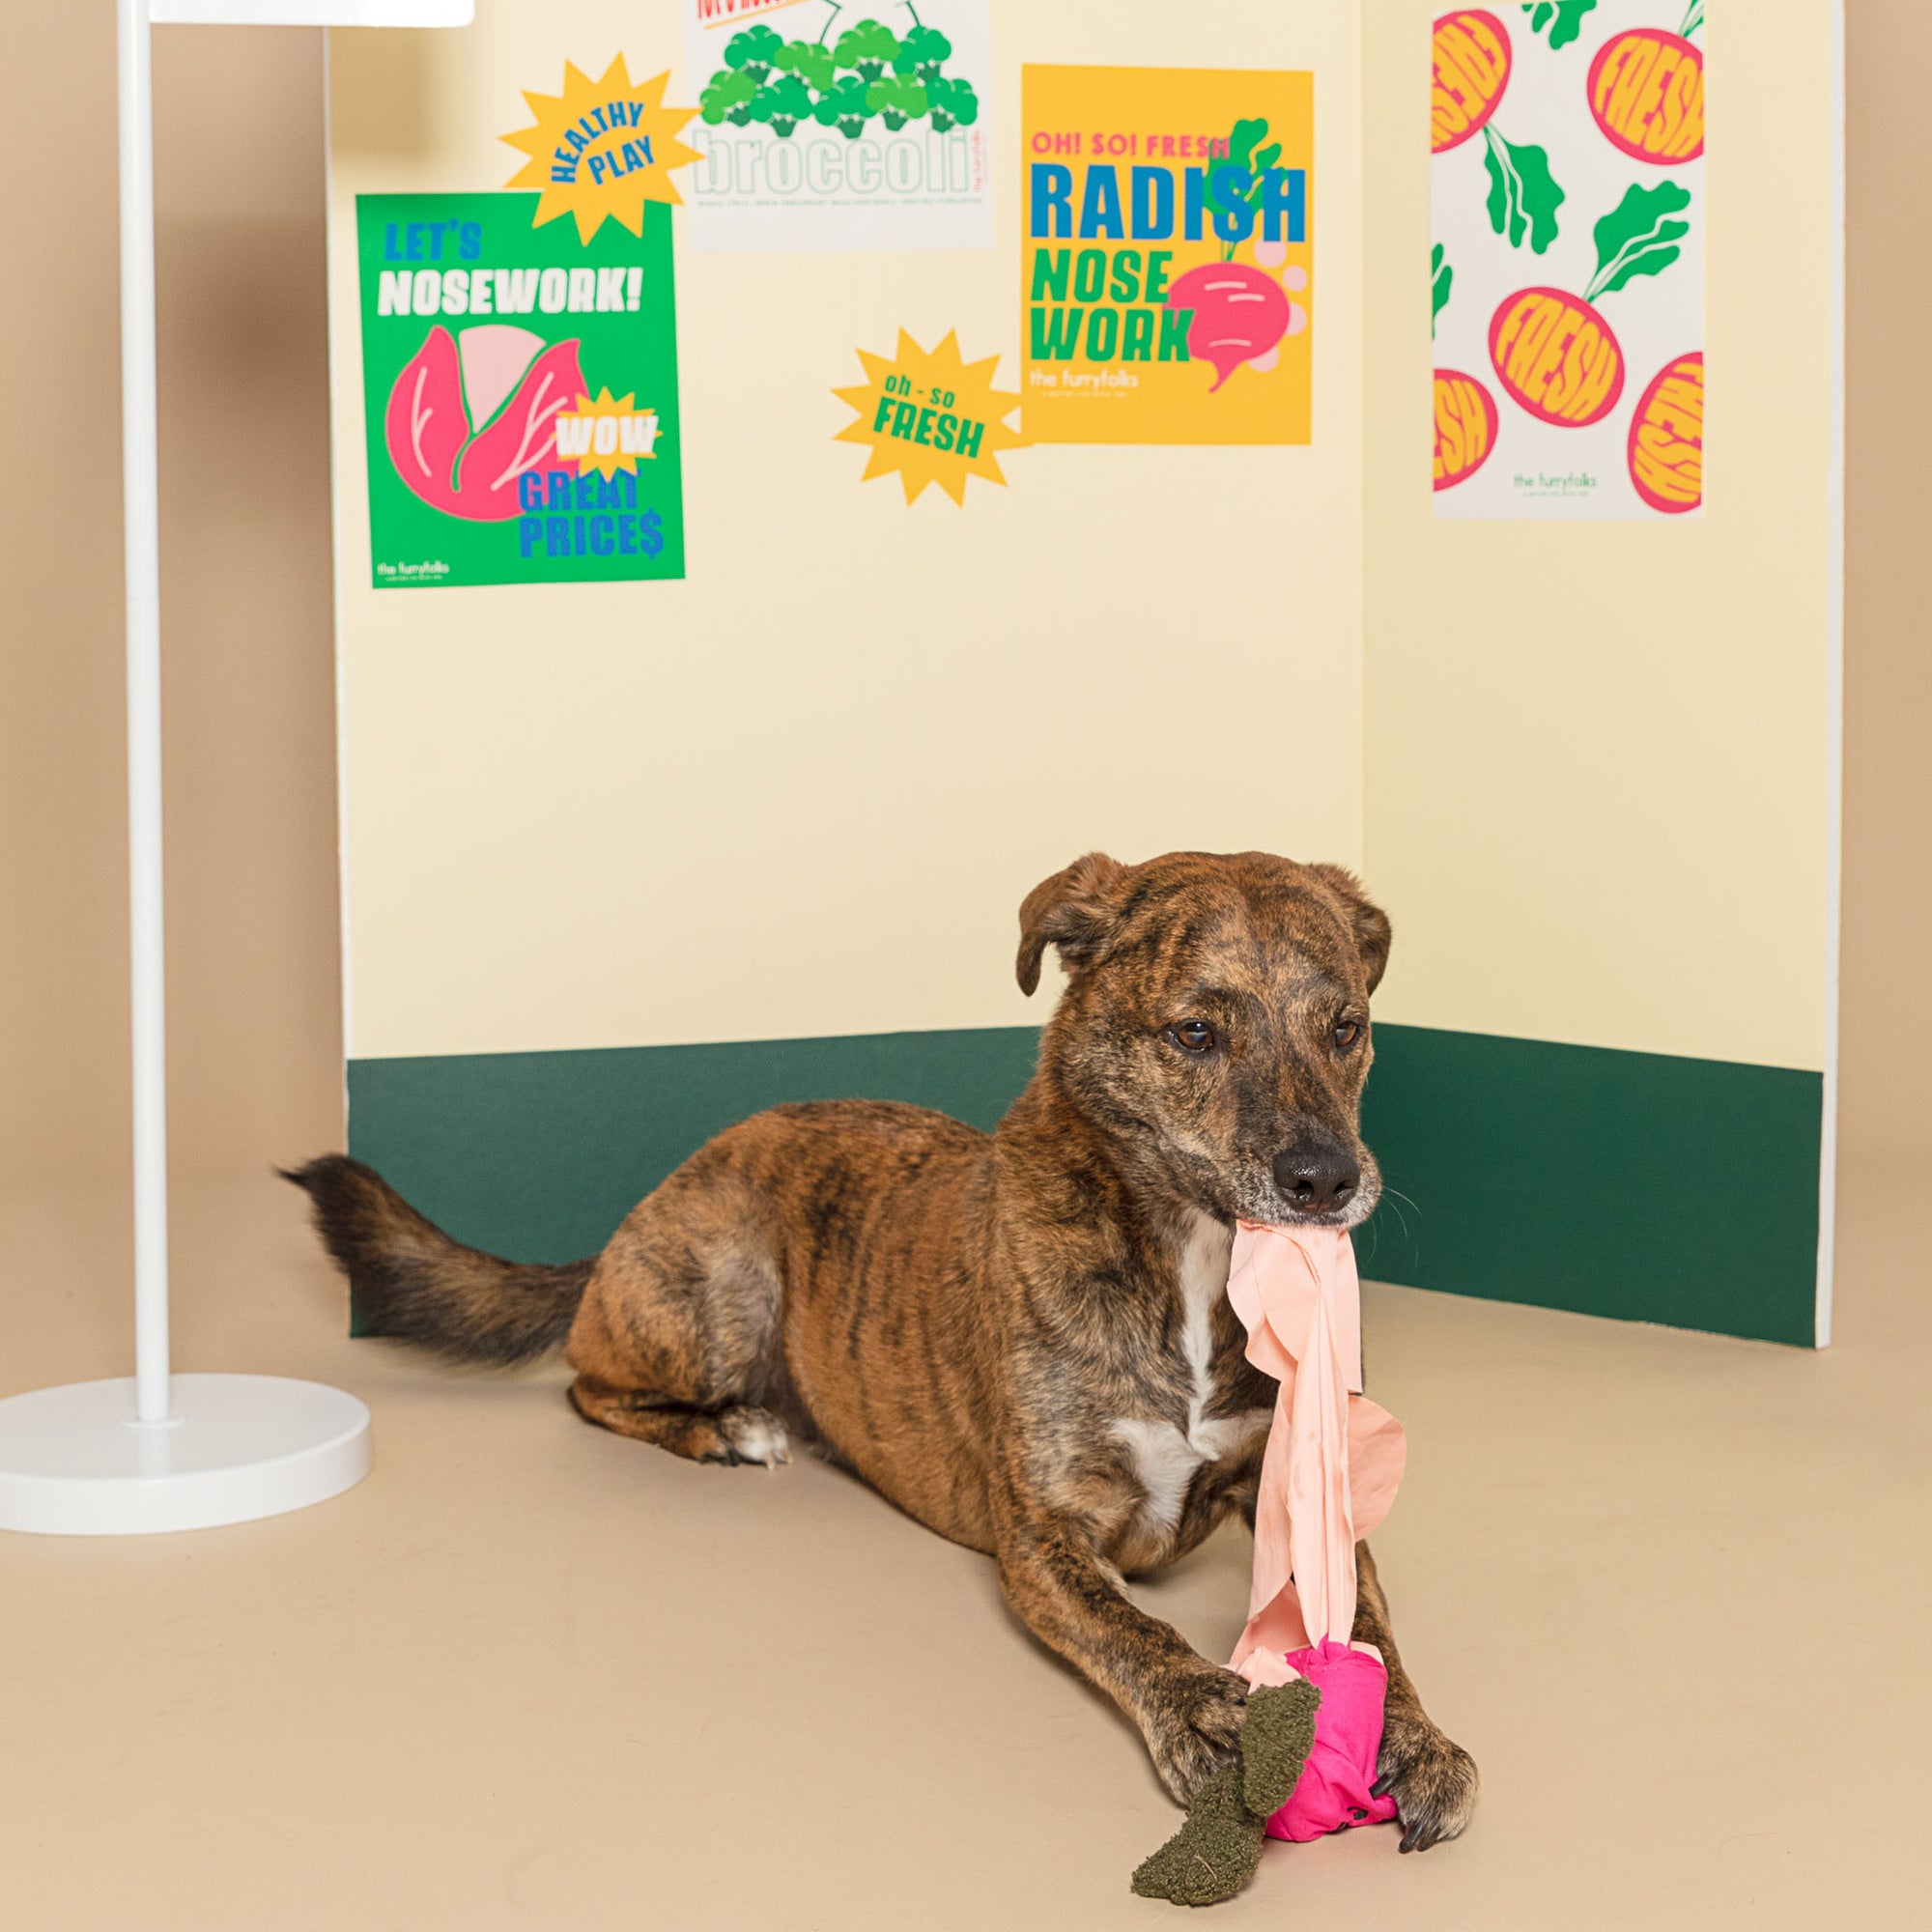 In the photo, a brindle-coated dog is sitting on the floor, holding a pink radish-shaped toy in its mouth, against a backdrop of colorful posters with slogans promoting nosework and healthy play. The posters feature playful graphics of radishes and broccoli, with phrases like "Let's Nosework!" and "Oh So Fresh", likely part of a pet shop or an event focused on pet enrichment. The scene captures the essence of engaging pets with stimulating activities.